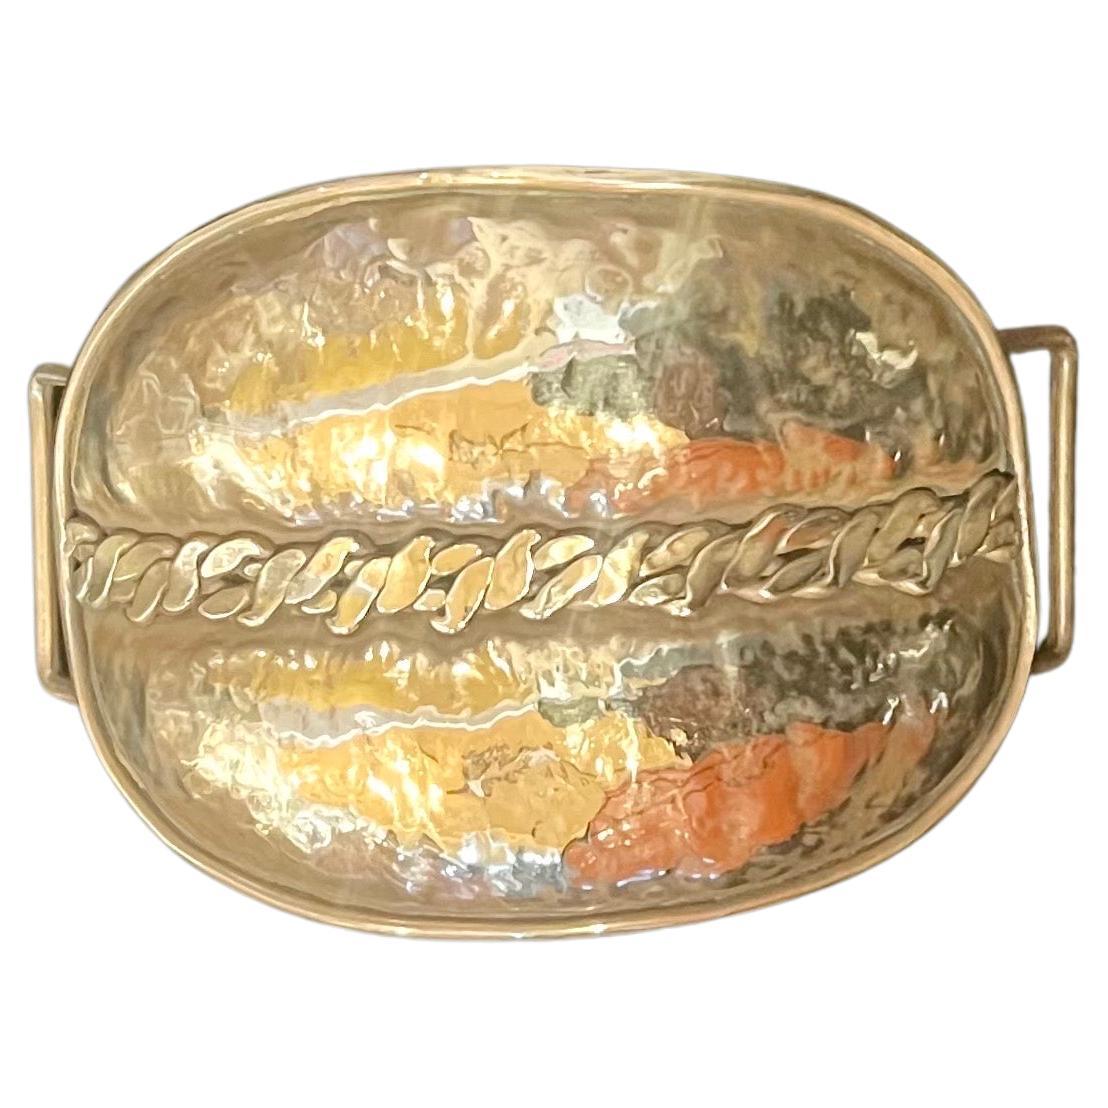 Beautiful Brutalist style hand hammered solid brass woman's belt buckle, circa 1970s, we polished the piece look striking.